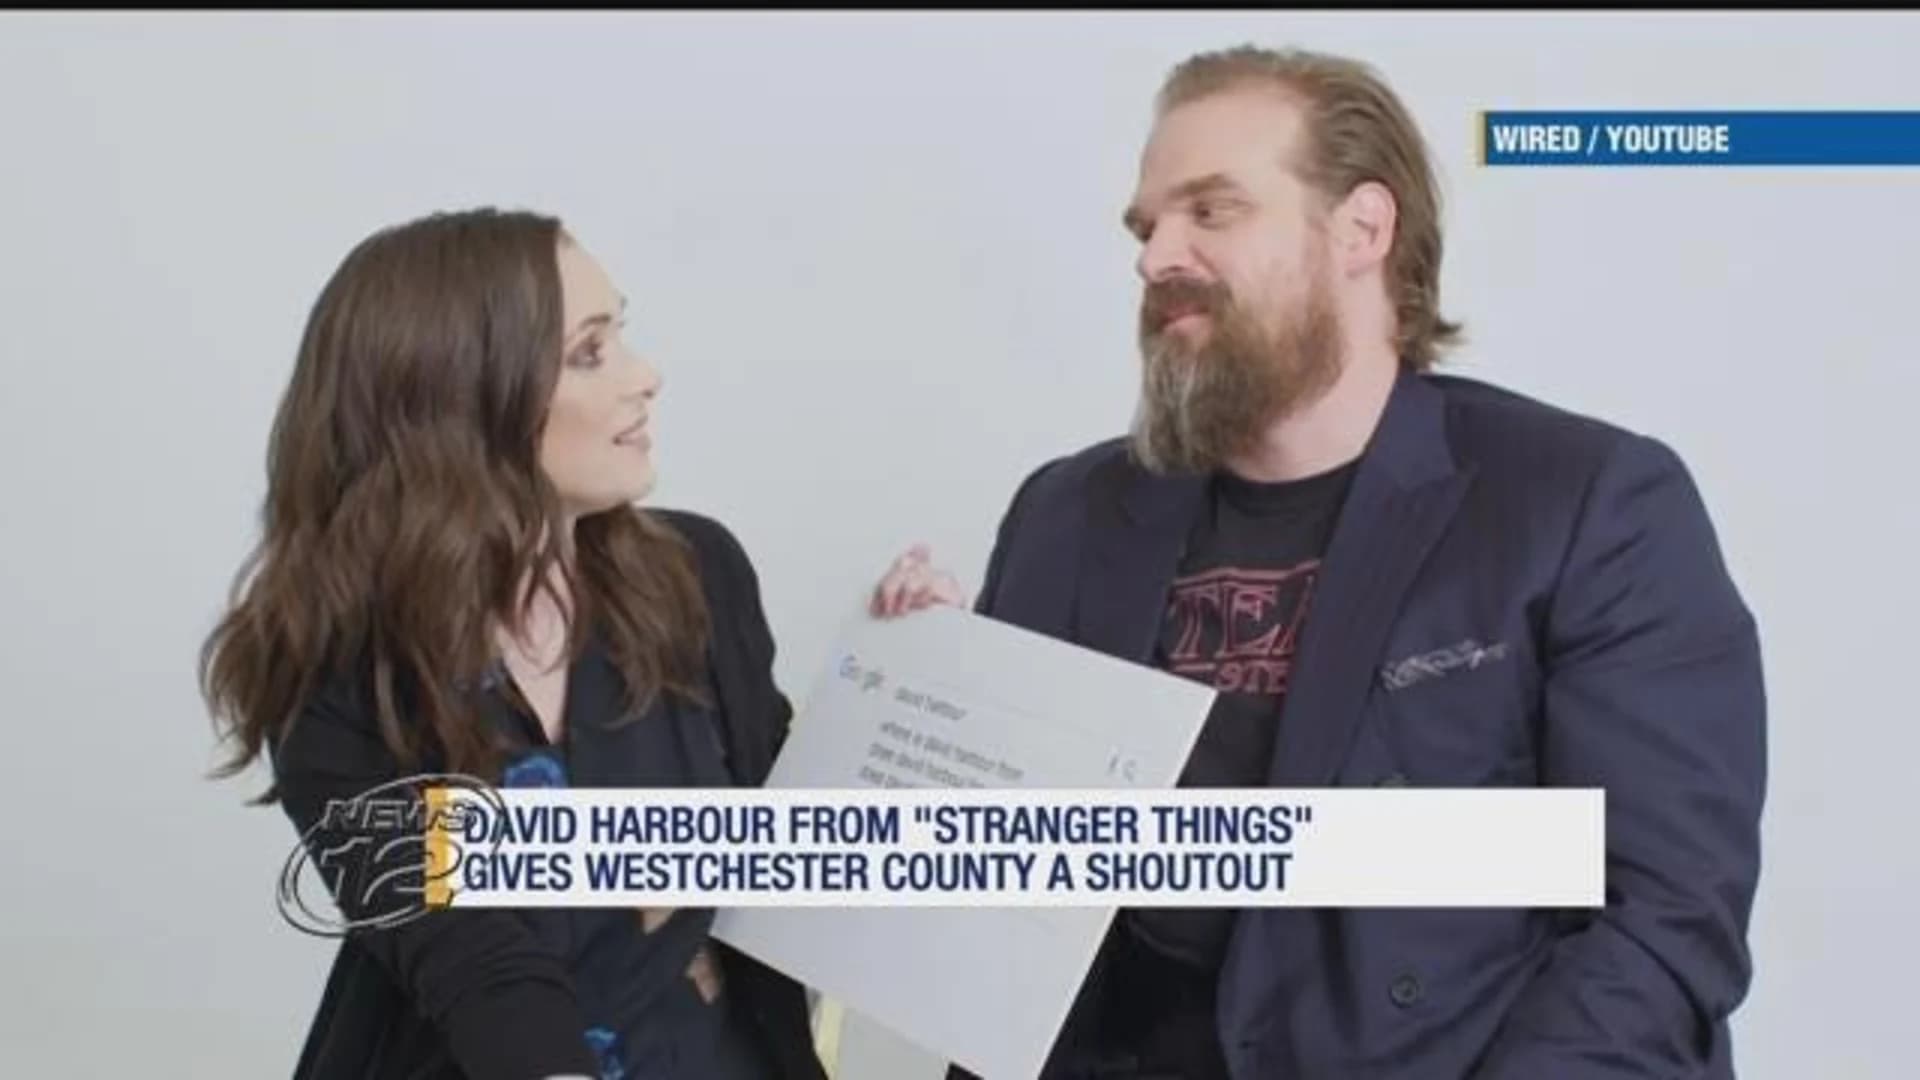 "Stranger Things" star gives Westchester shoutout